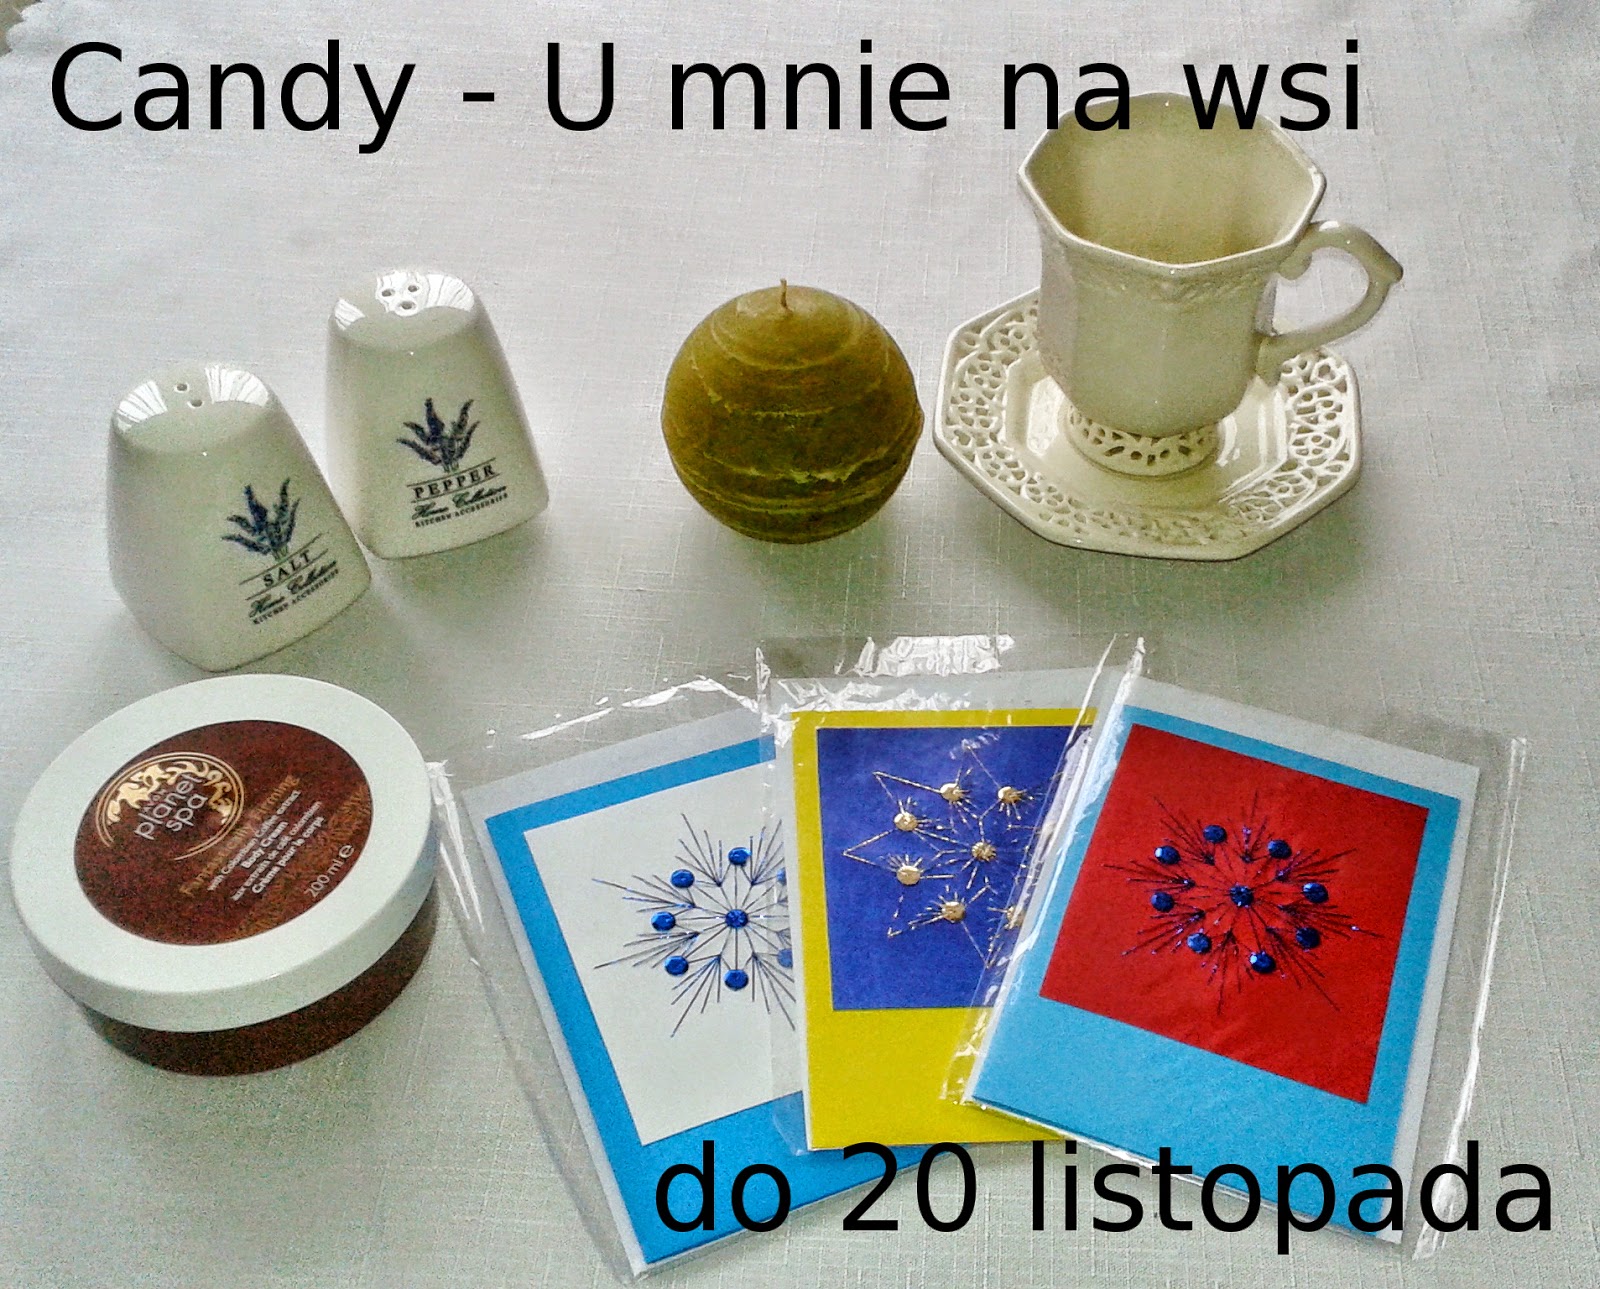 Candy 20.11.14